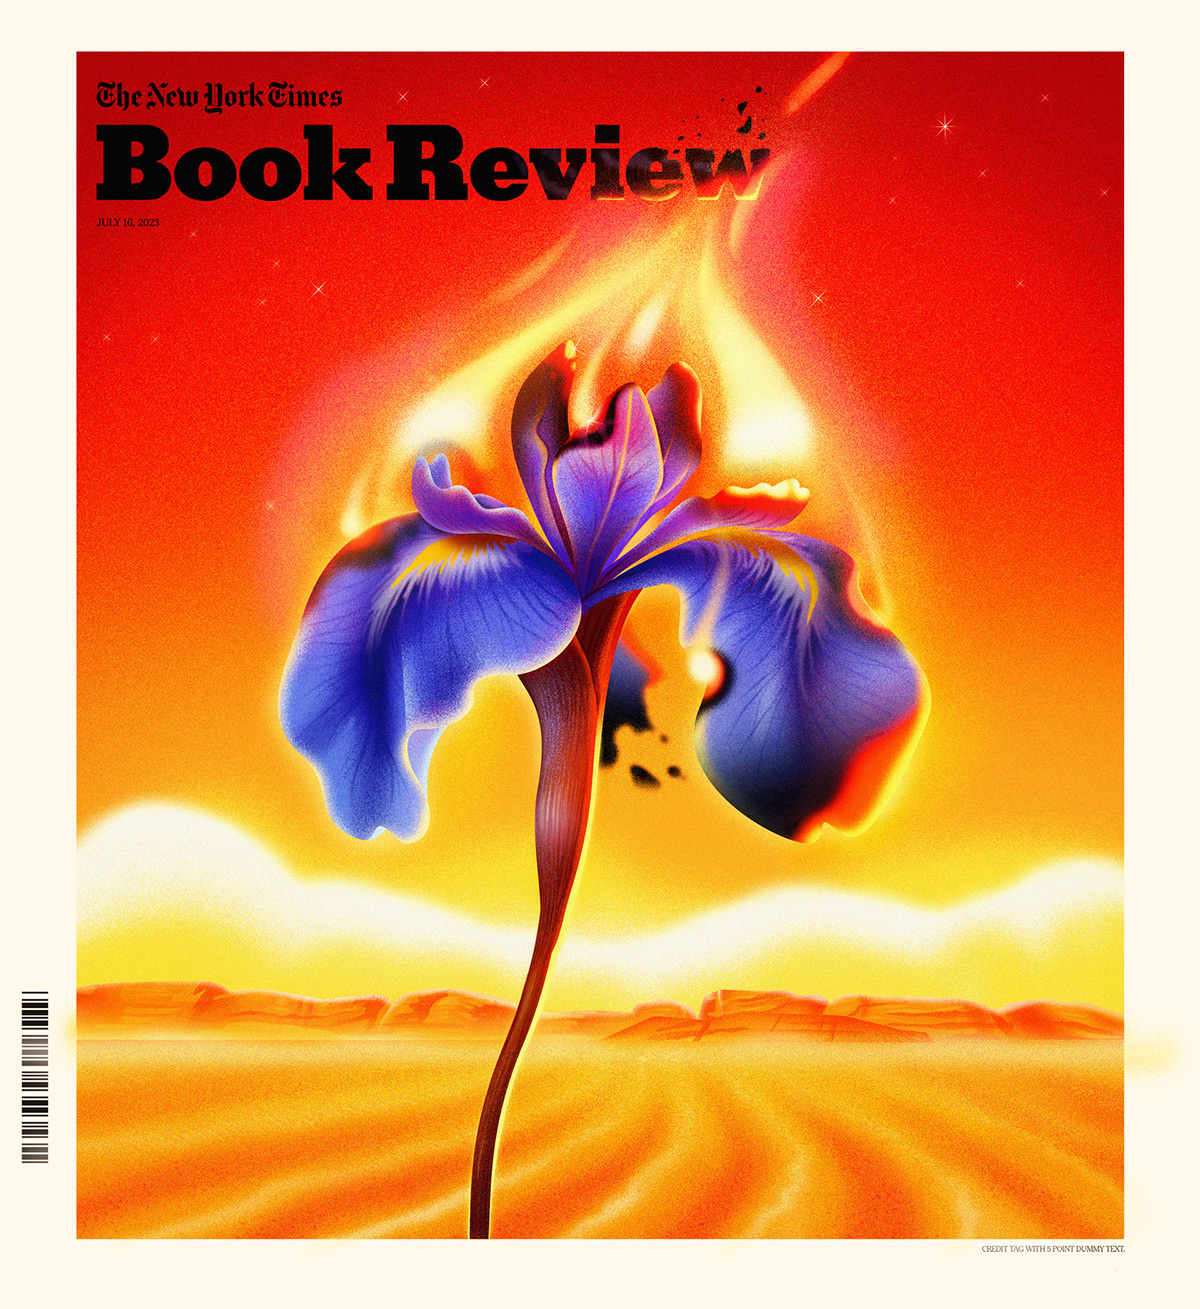 ILLUSTRATION  botanical editorial New York Times conceptual global warming climate change Nature fire butterfly